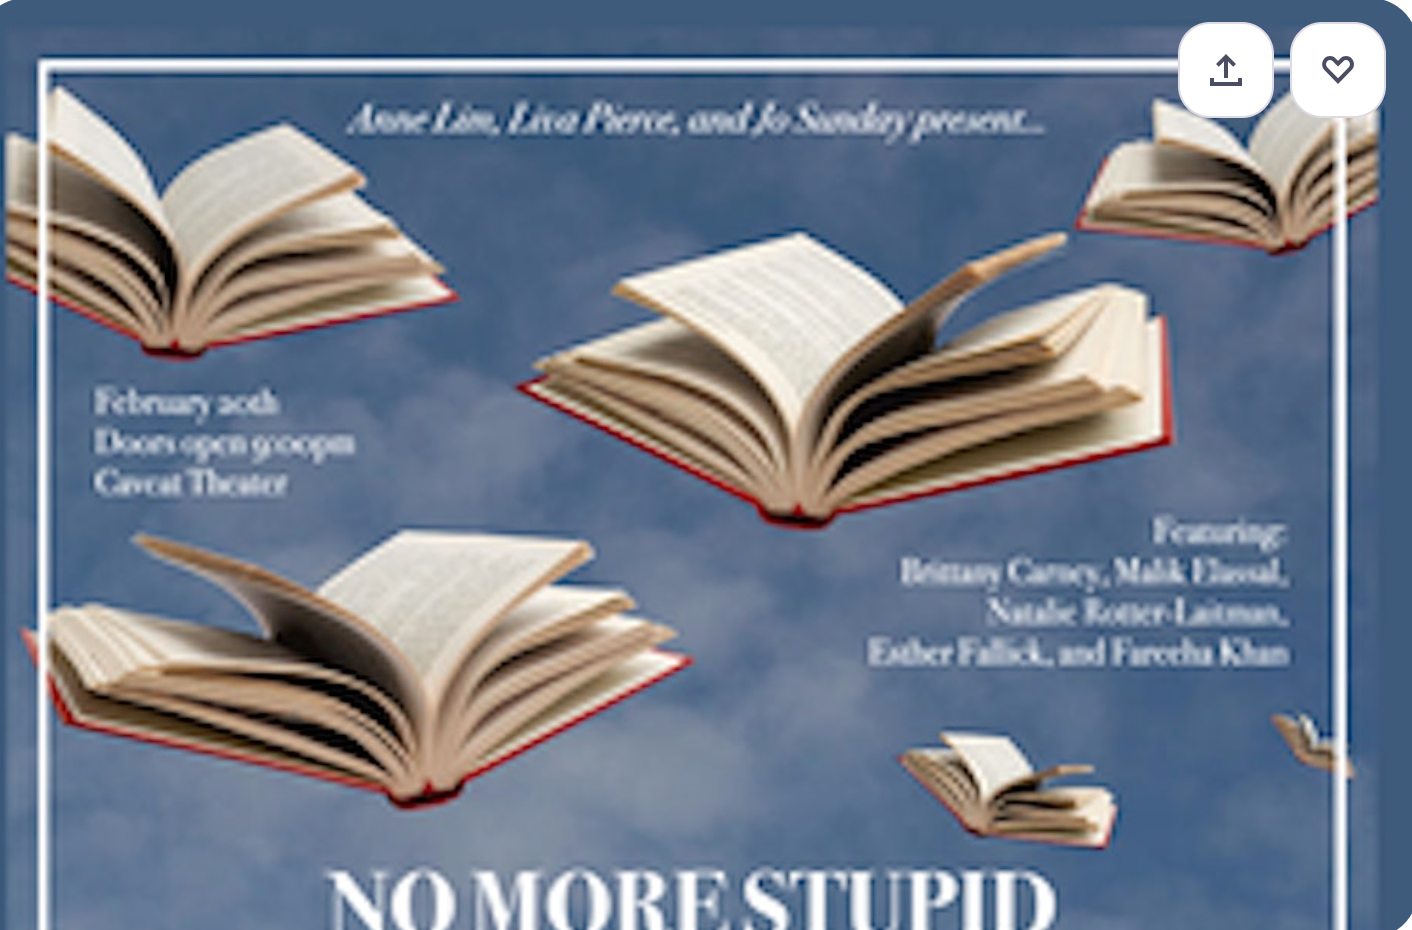 No More Stupid: A Fundraiser Show for Palestine Legal and eSIMs for Gaza